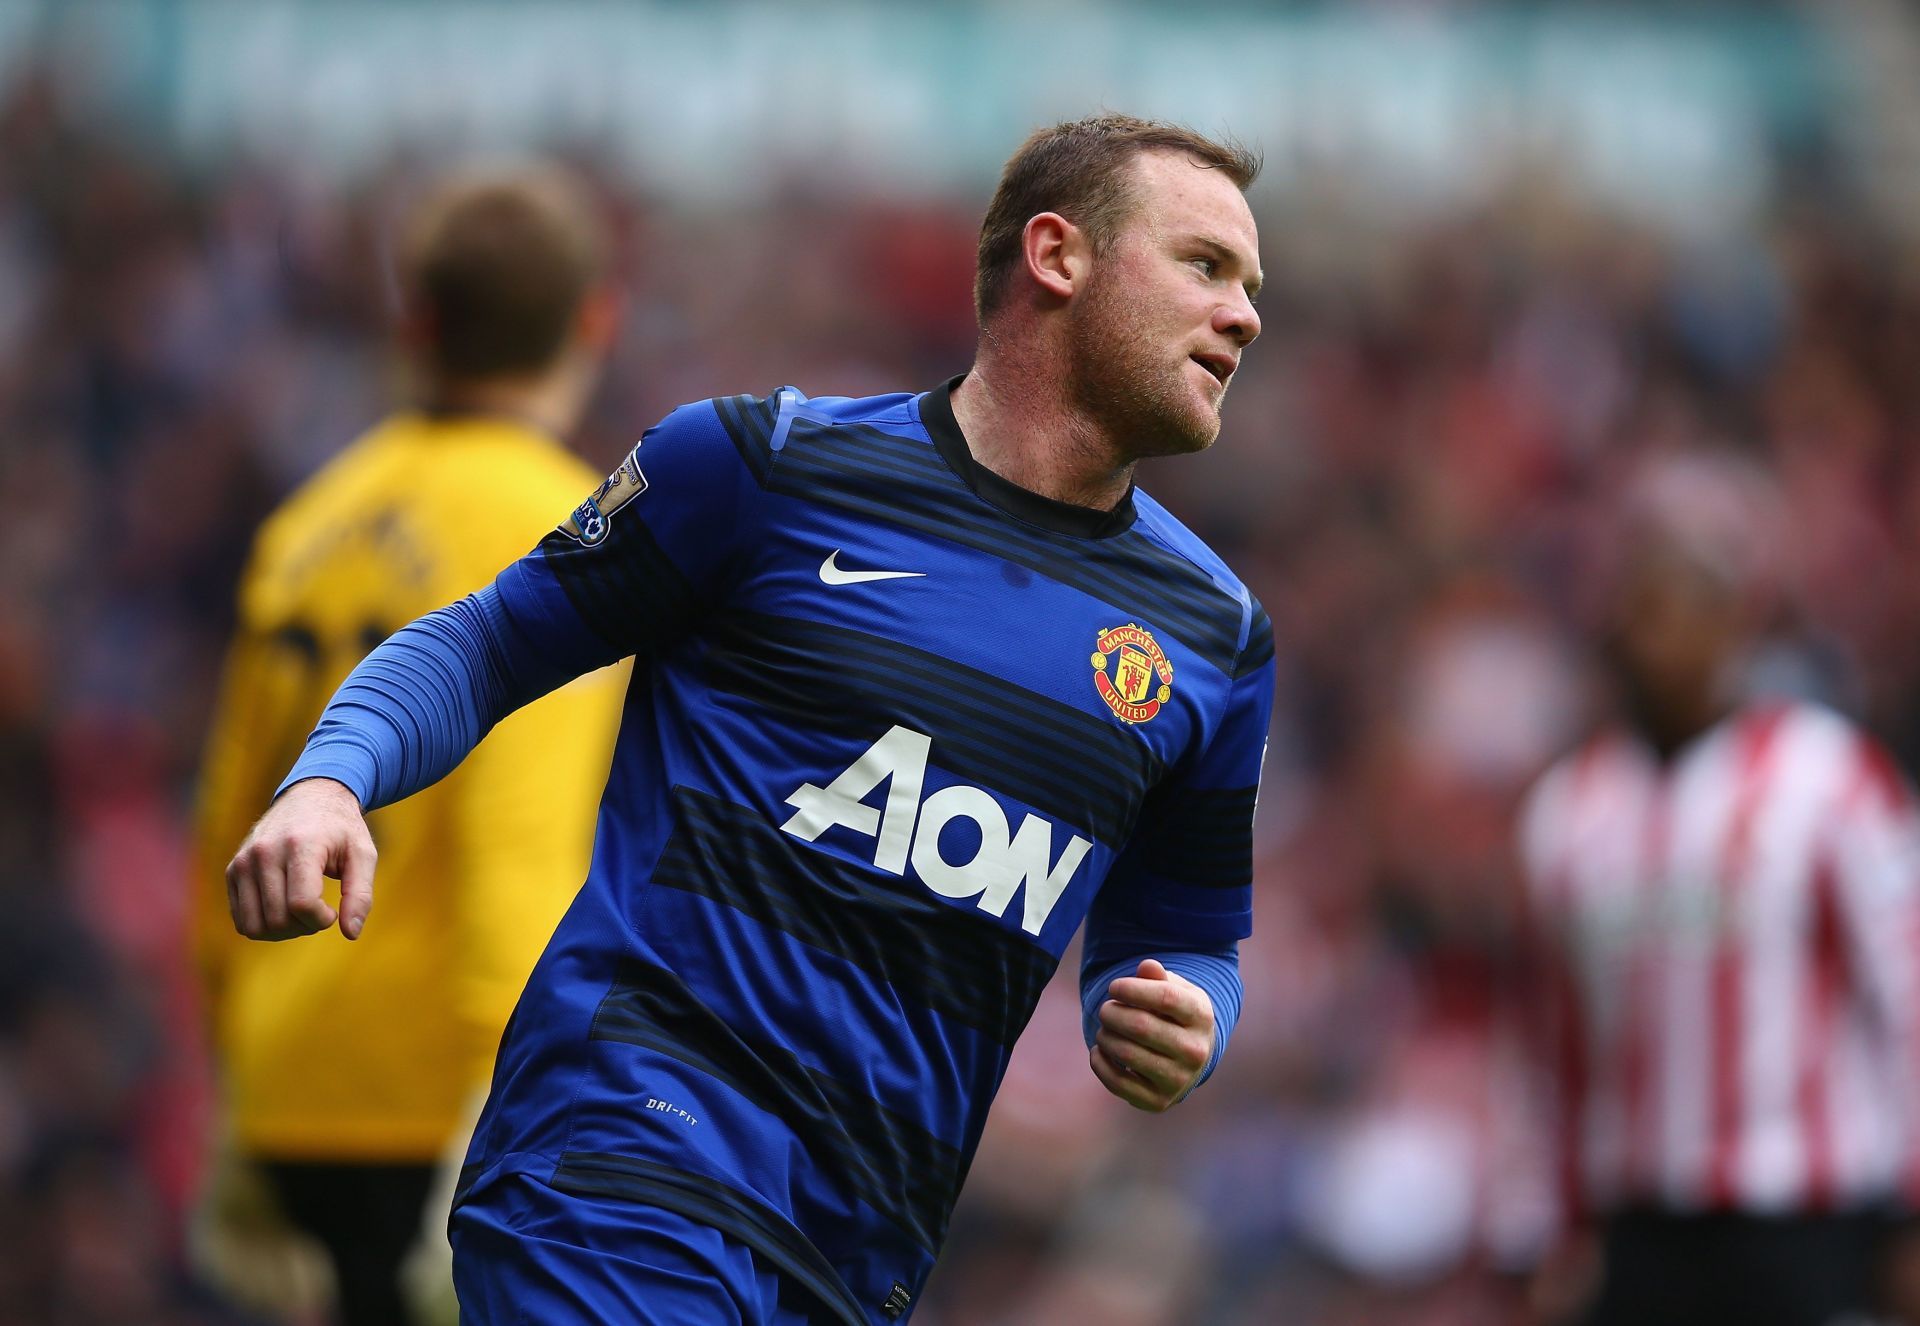 Wayne Rooney wants the Old Trafford job in the future